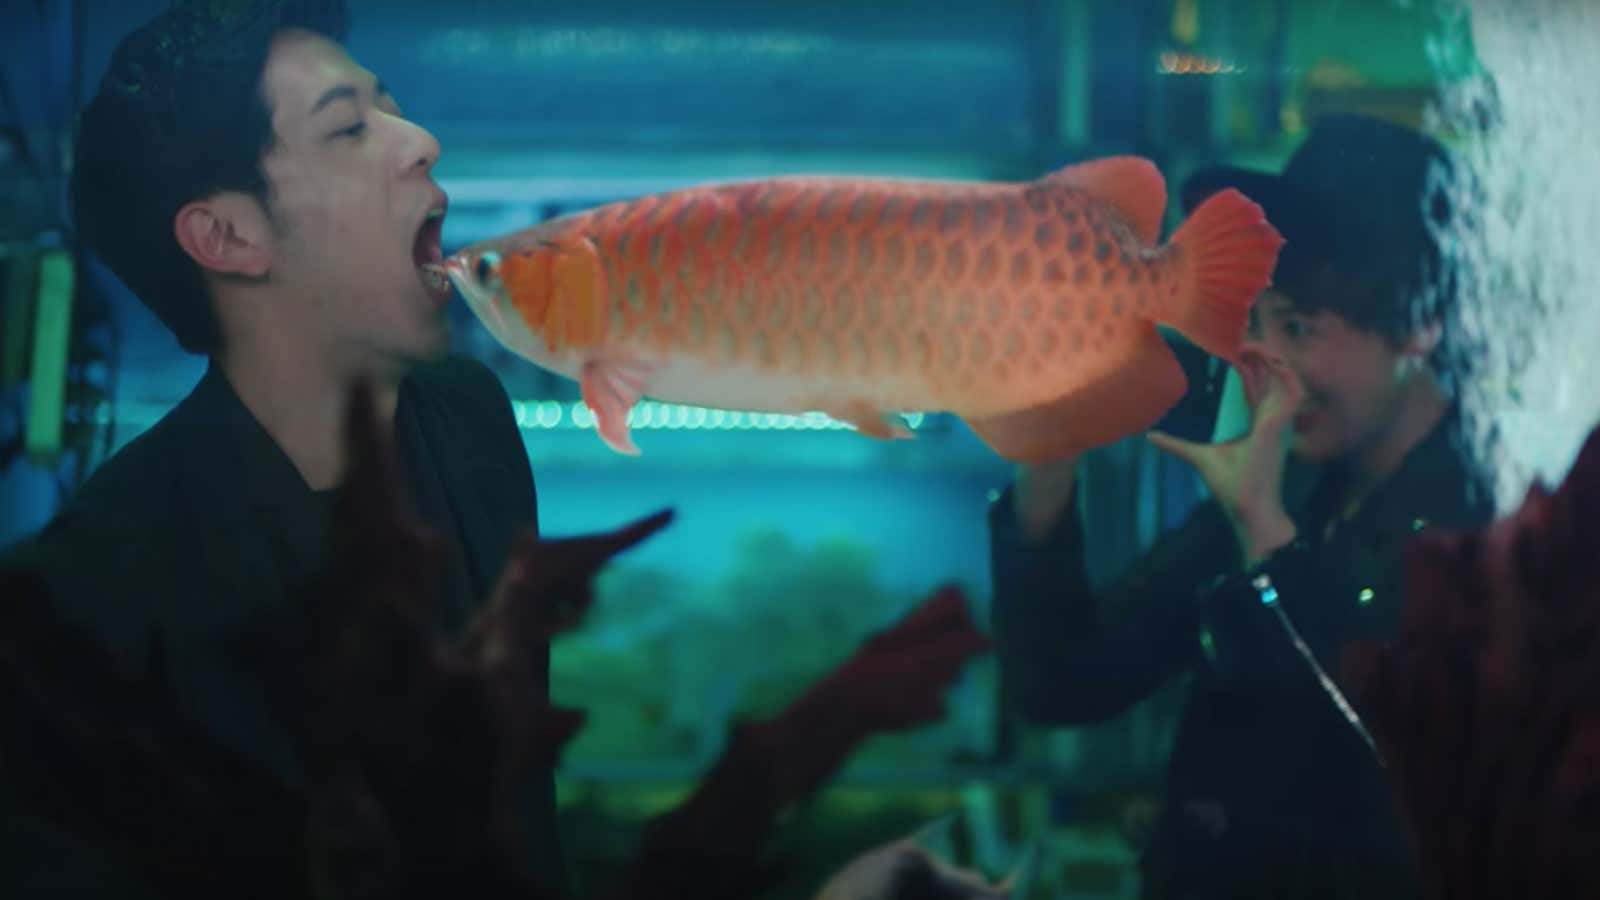 The Shanghai aquarium is part of the backdrop in one of Apple’s new advertisements.